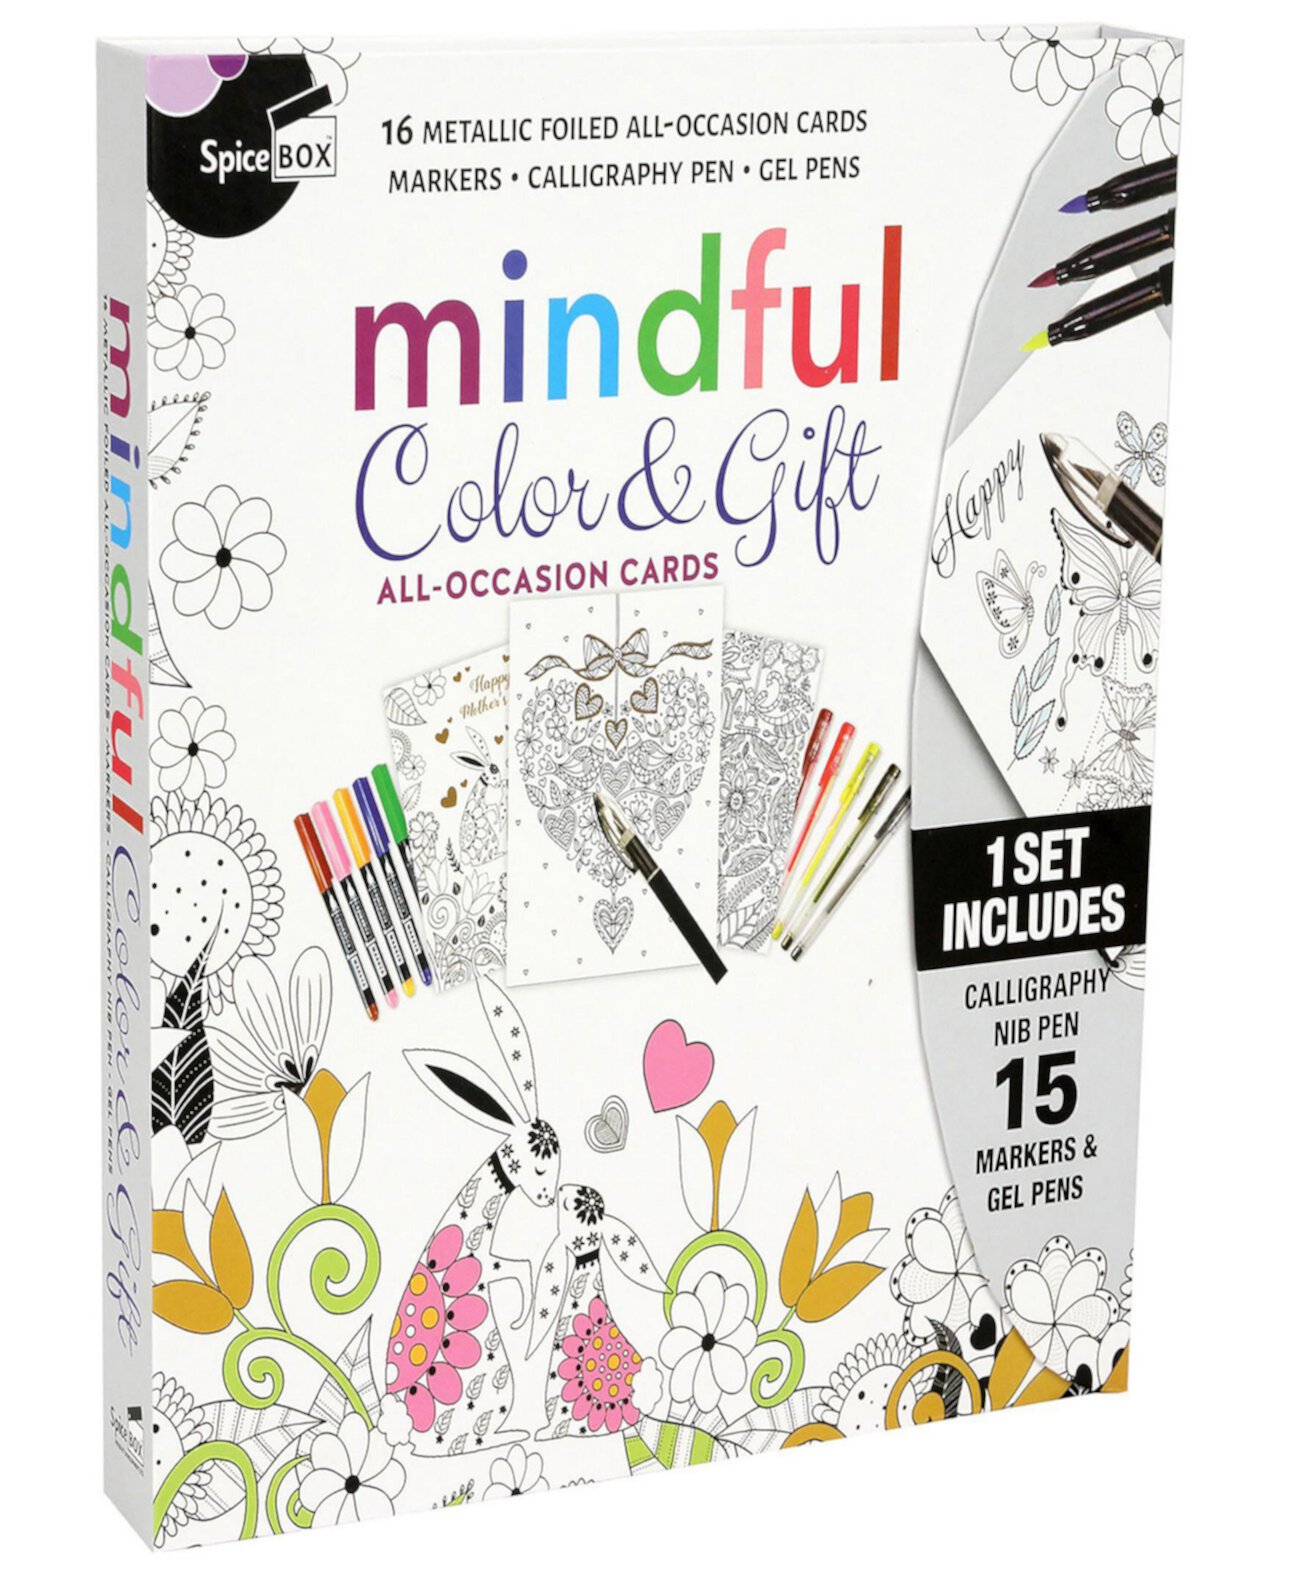 Sketch Plus - Mindful Color and Gift All-Occasion Cards Kit Spicebox